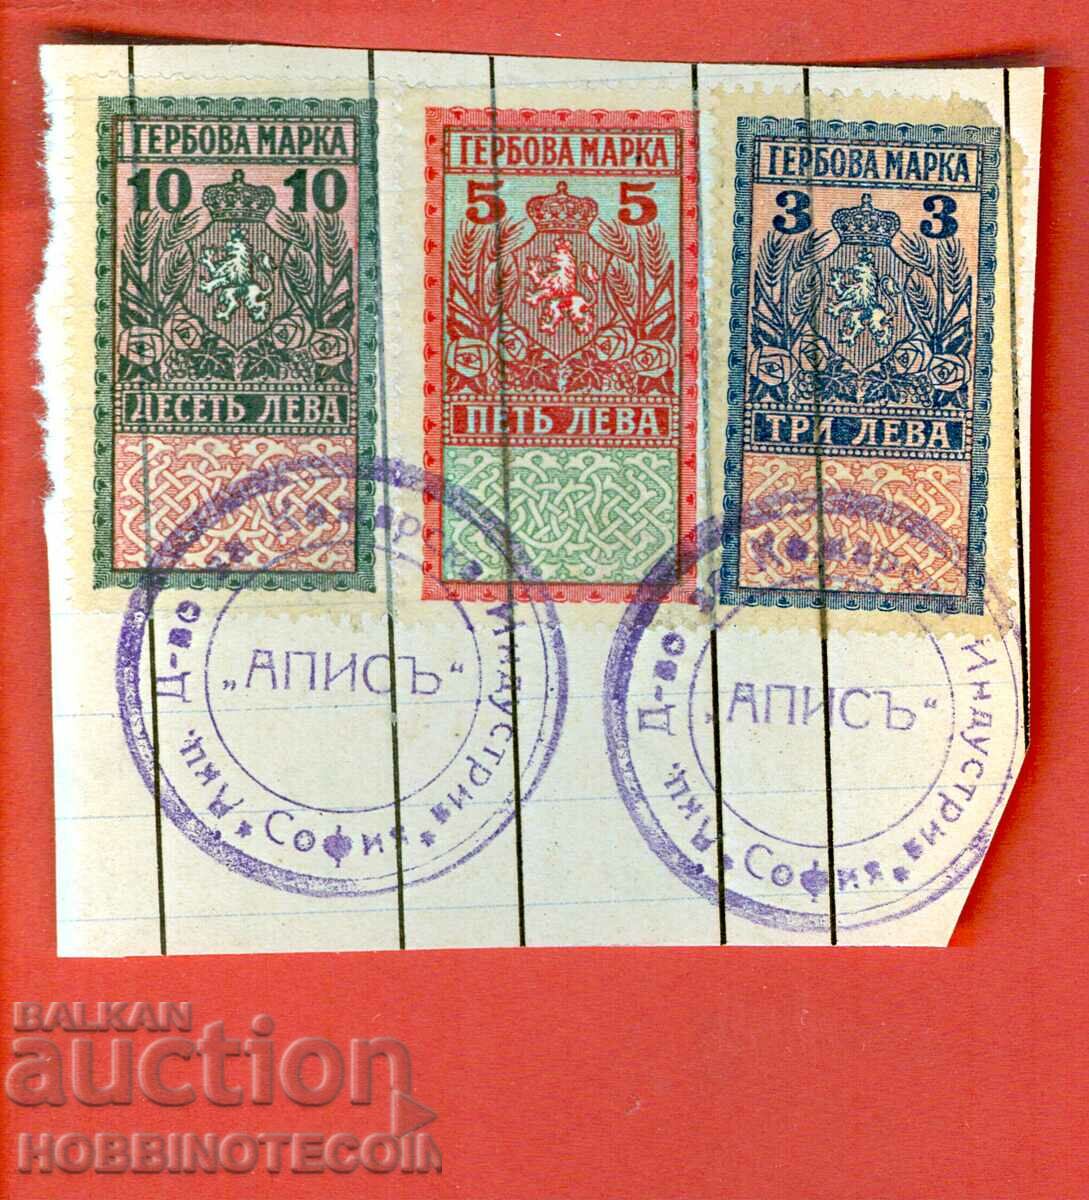 BULGARIA STAMPS STAMPS STAMPS 3 5 10 leva - 1925